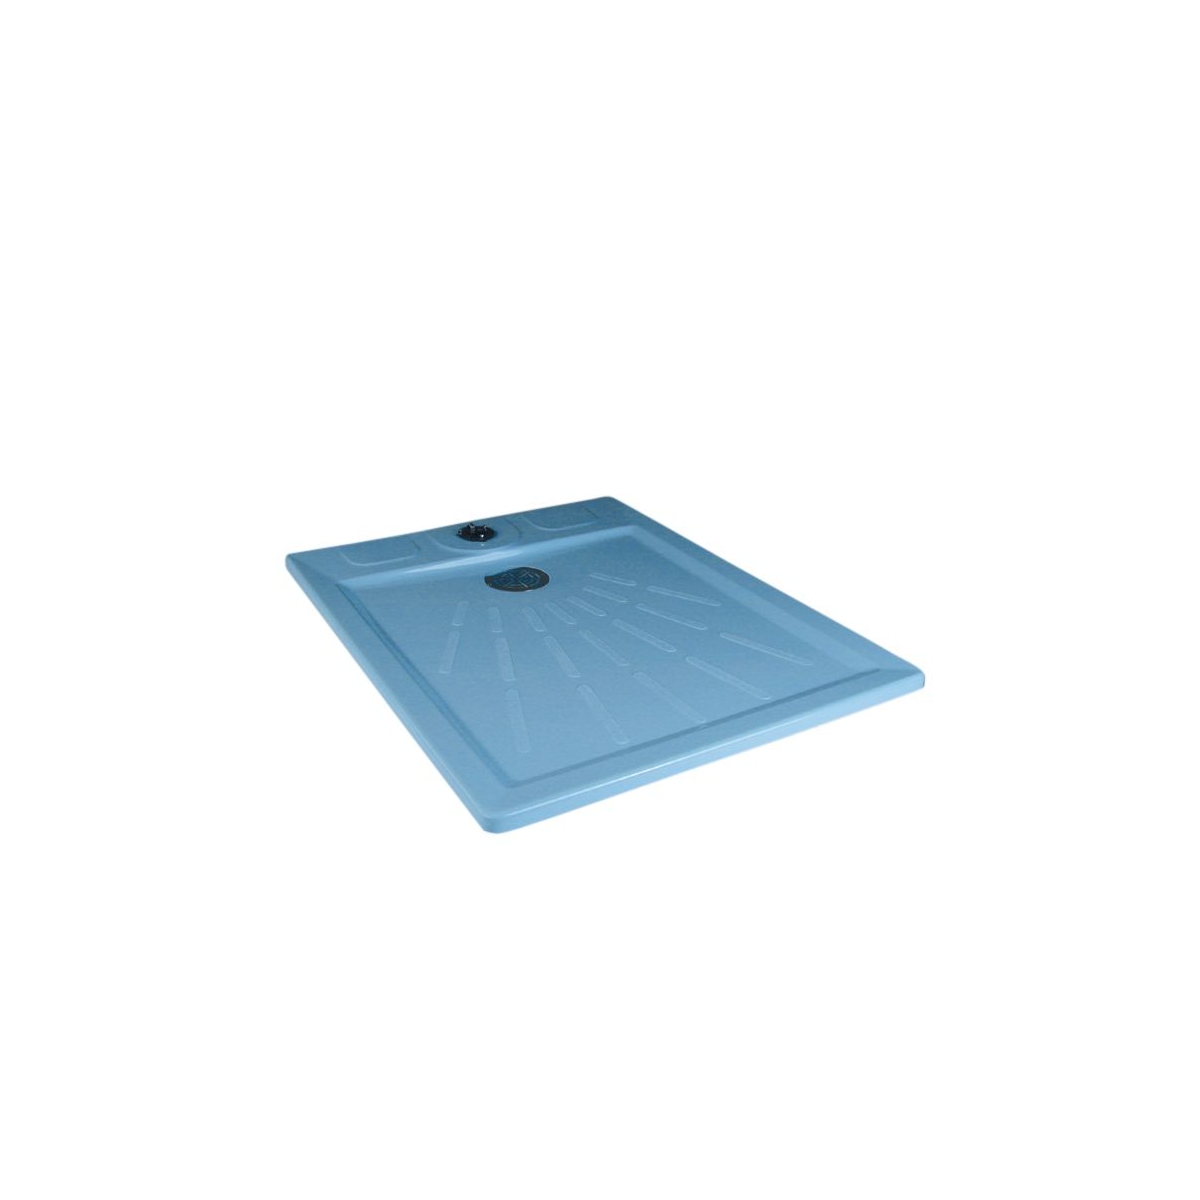 Classic model shower tray